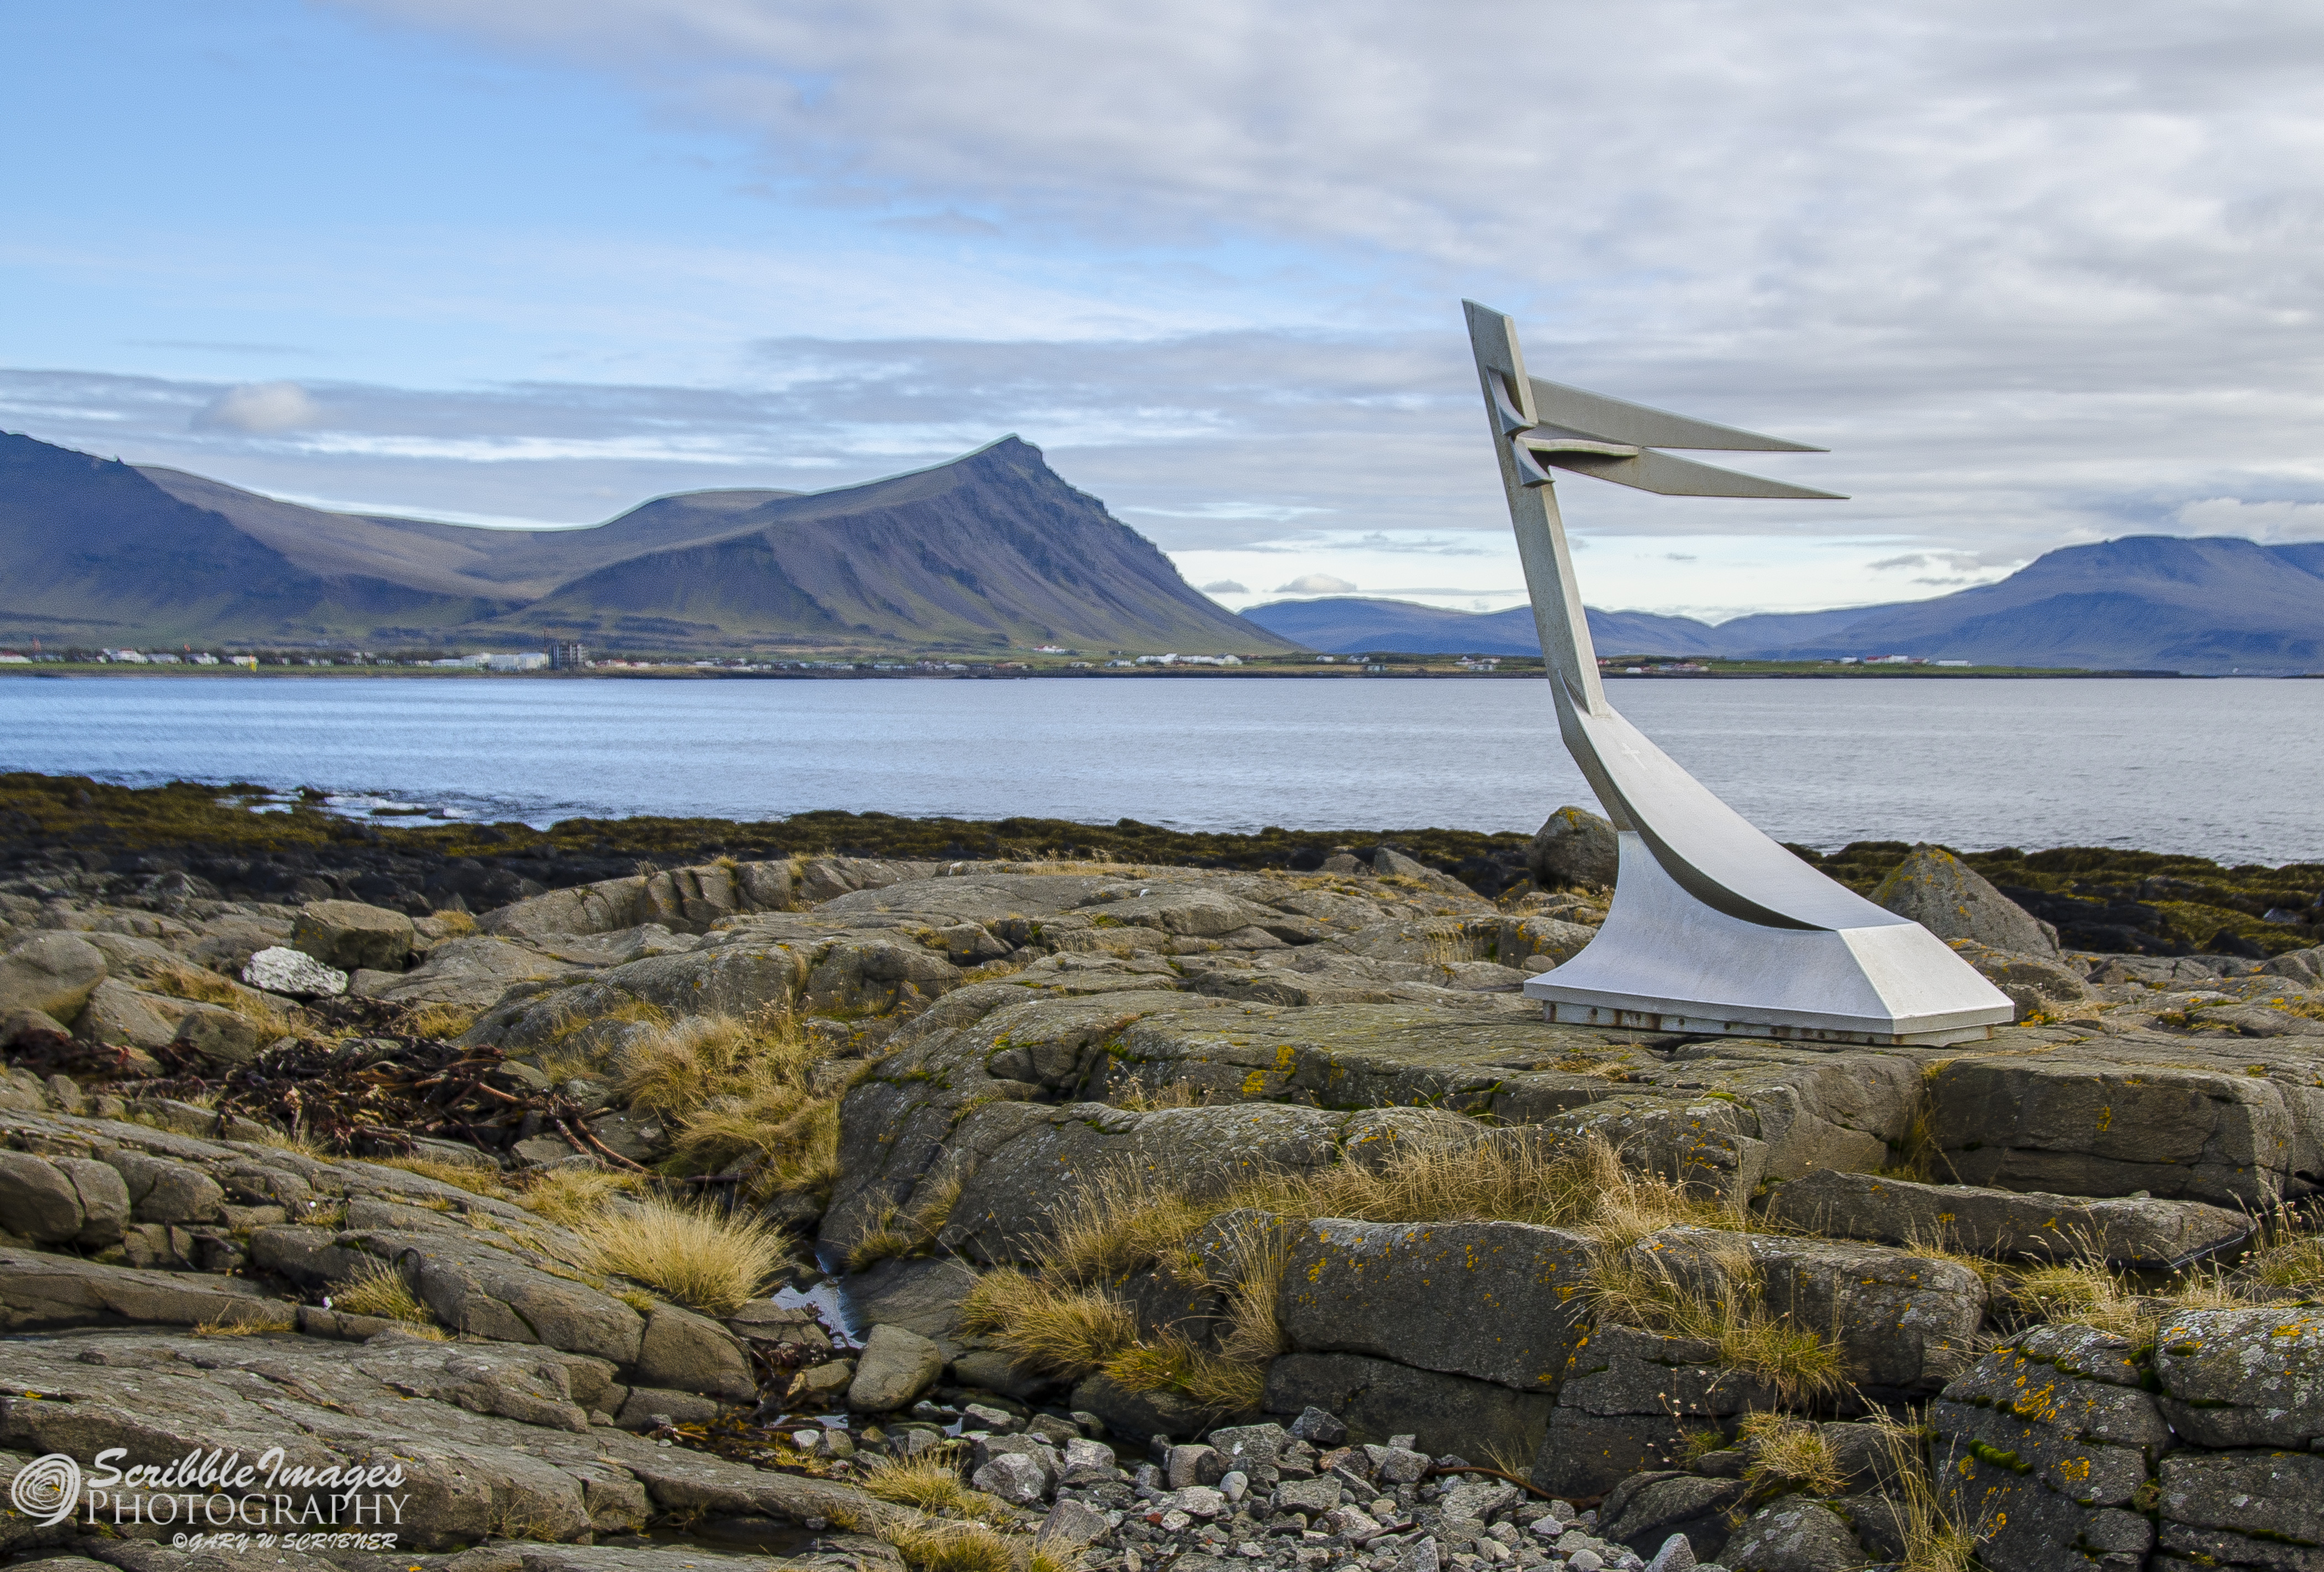 Memorial to Mermaid Boat, Akranes Lighthouse